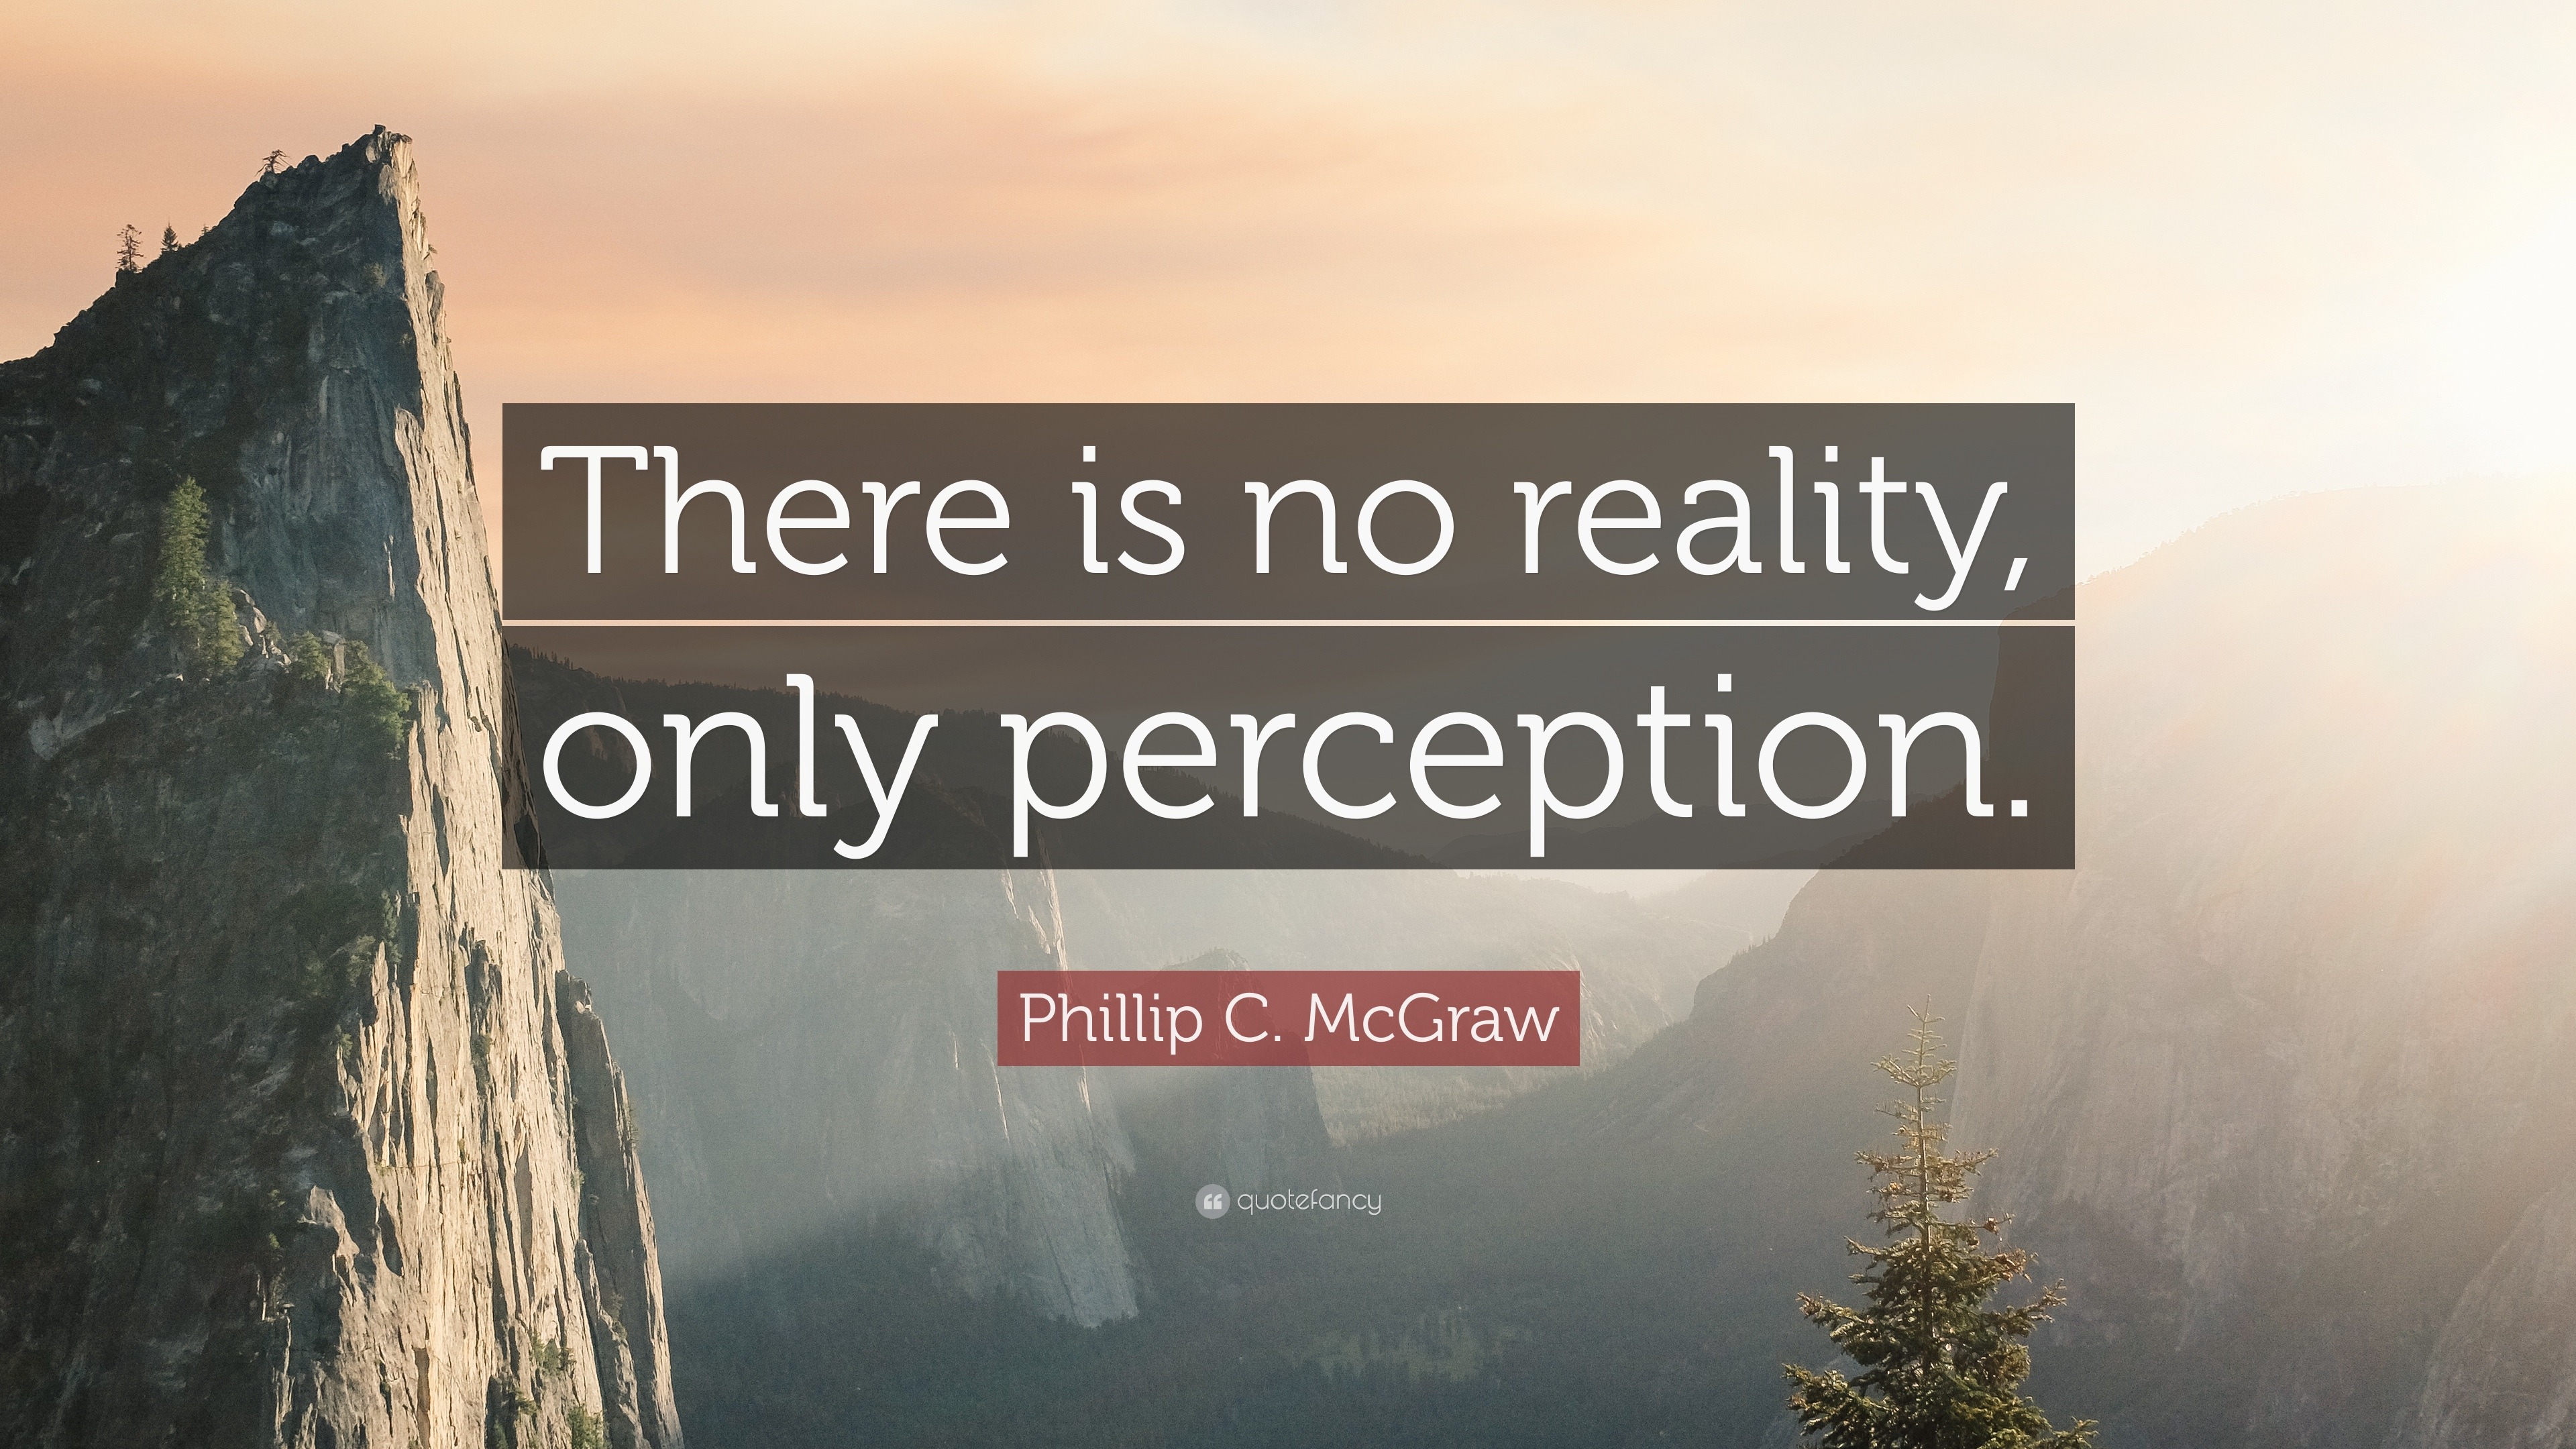 perception reality only is